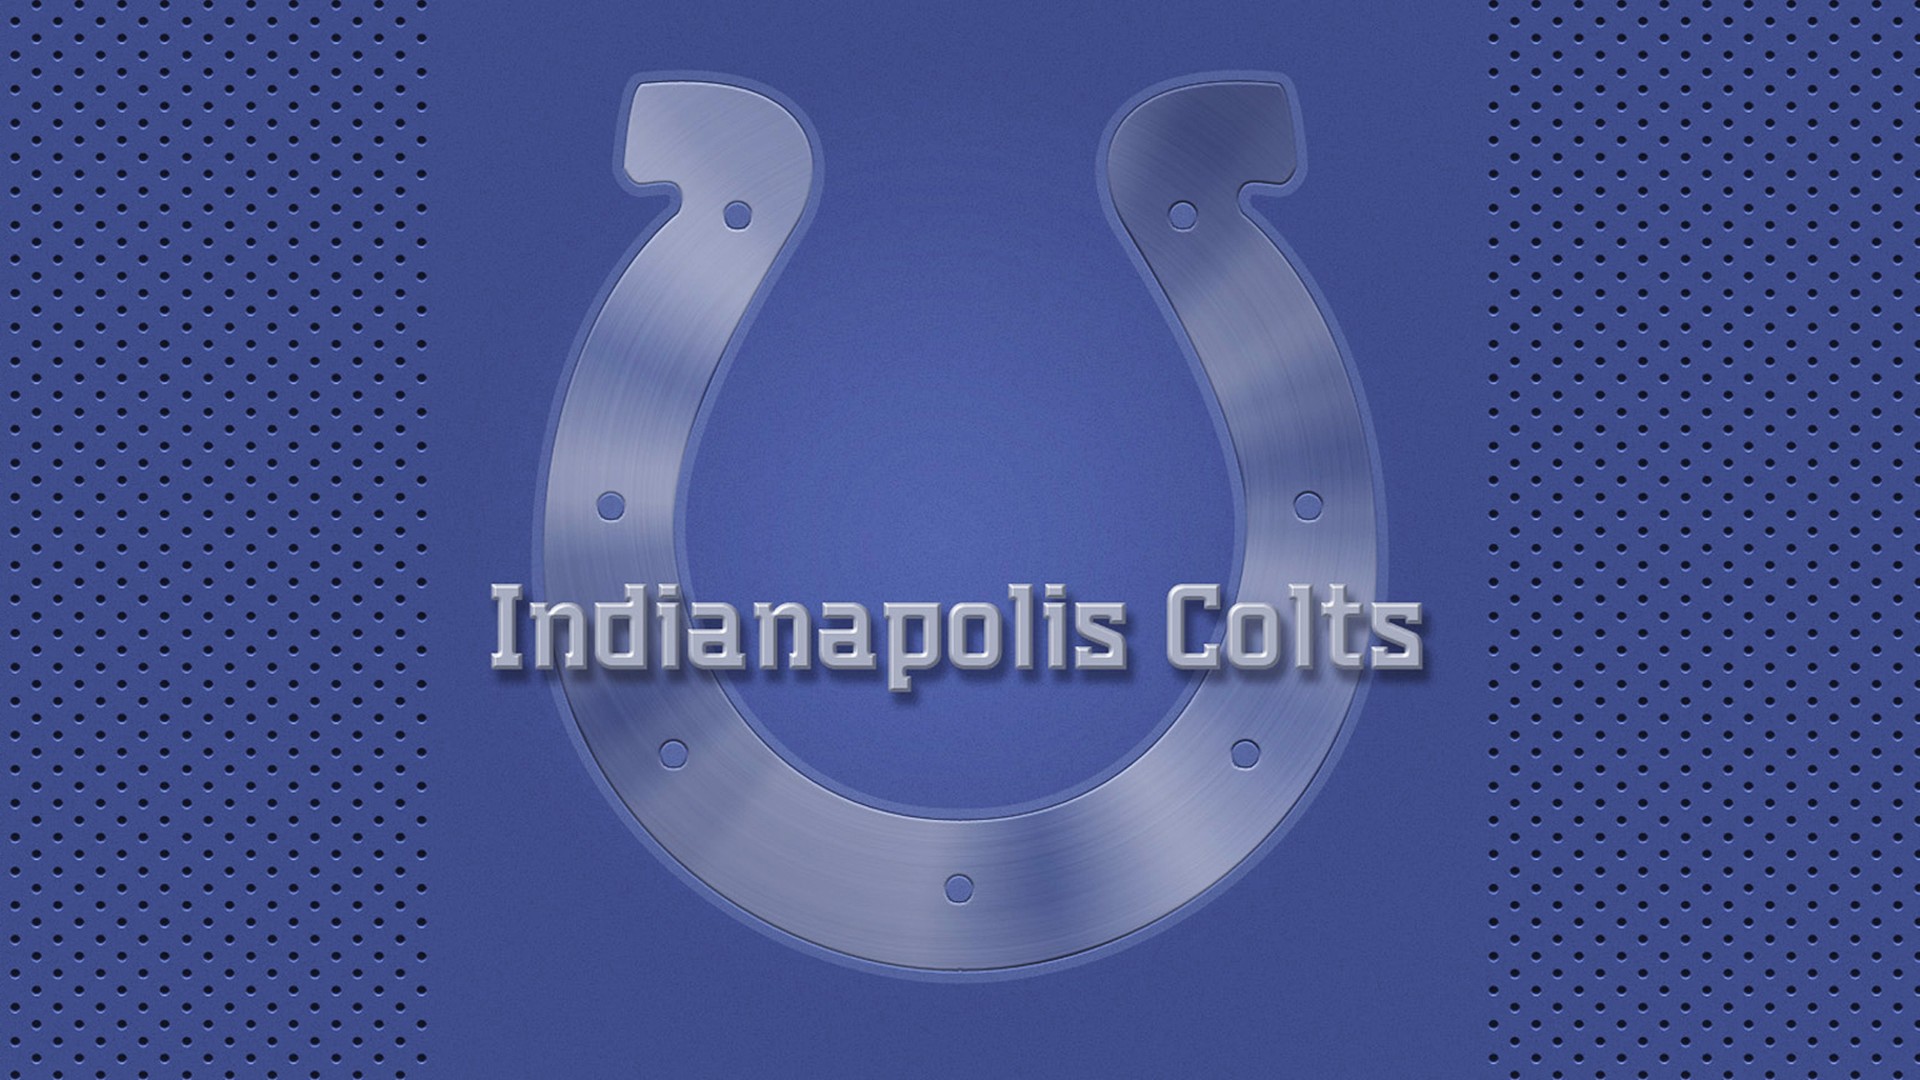 Indianapolis Colts NFL Mac Backgrounds With Resolution 1920X1080 pixel. You can make this wallpaper for your Mac or Windows Desktop Background, iPhone, Android or Tablet and another Smartphone device for free